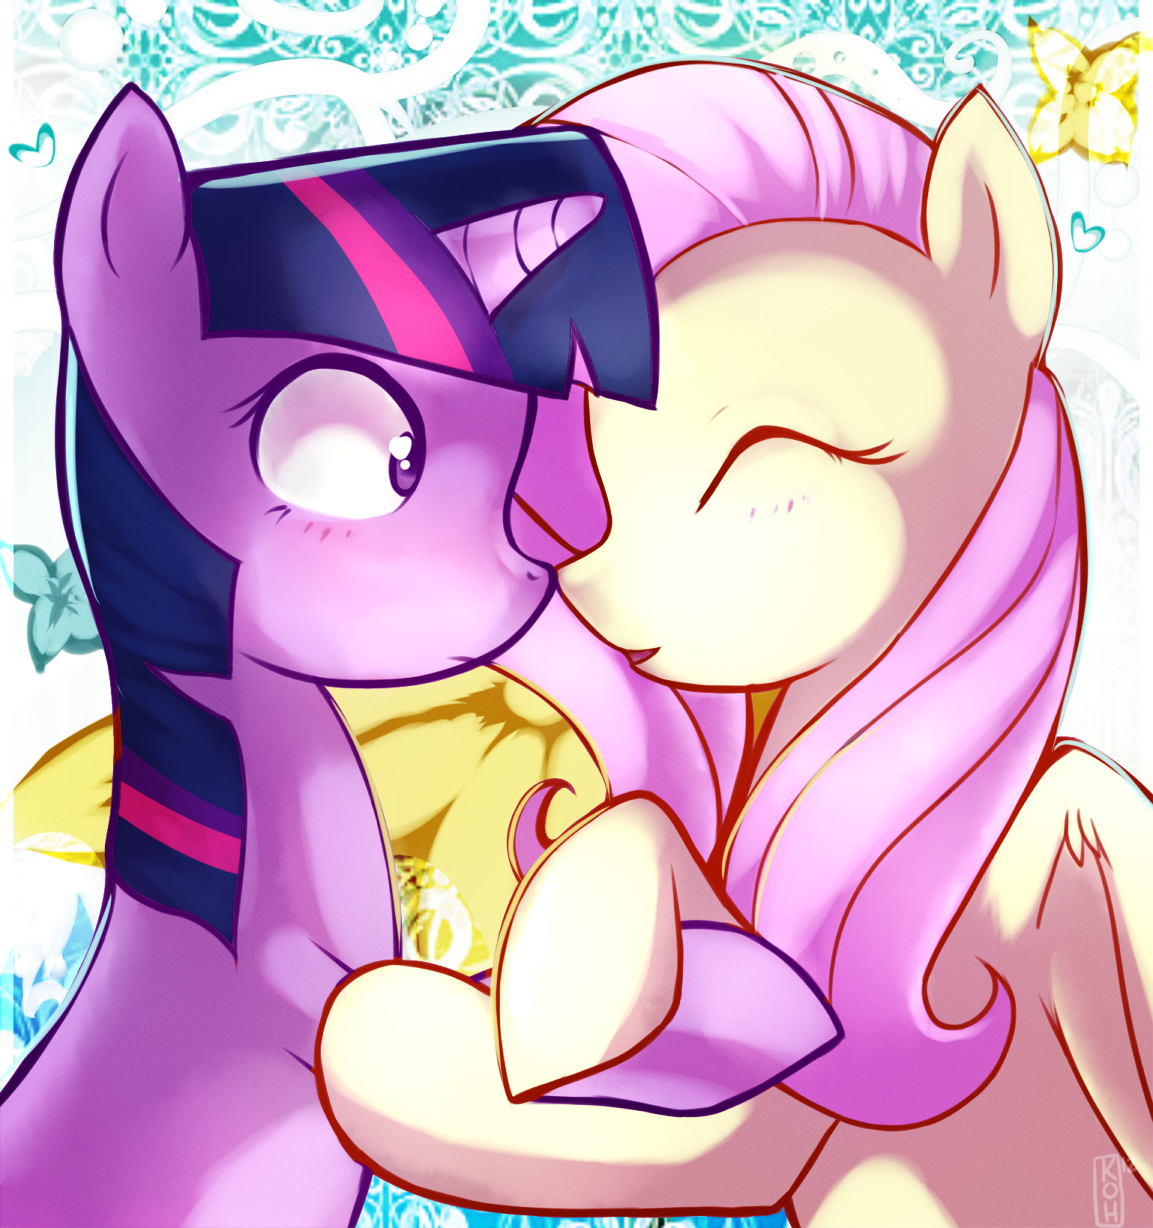 Boop by Silver_Moon